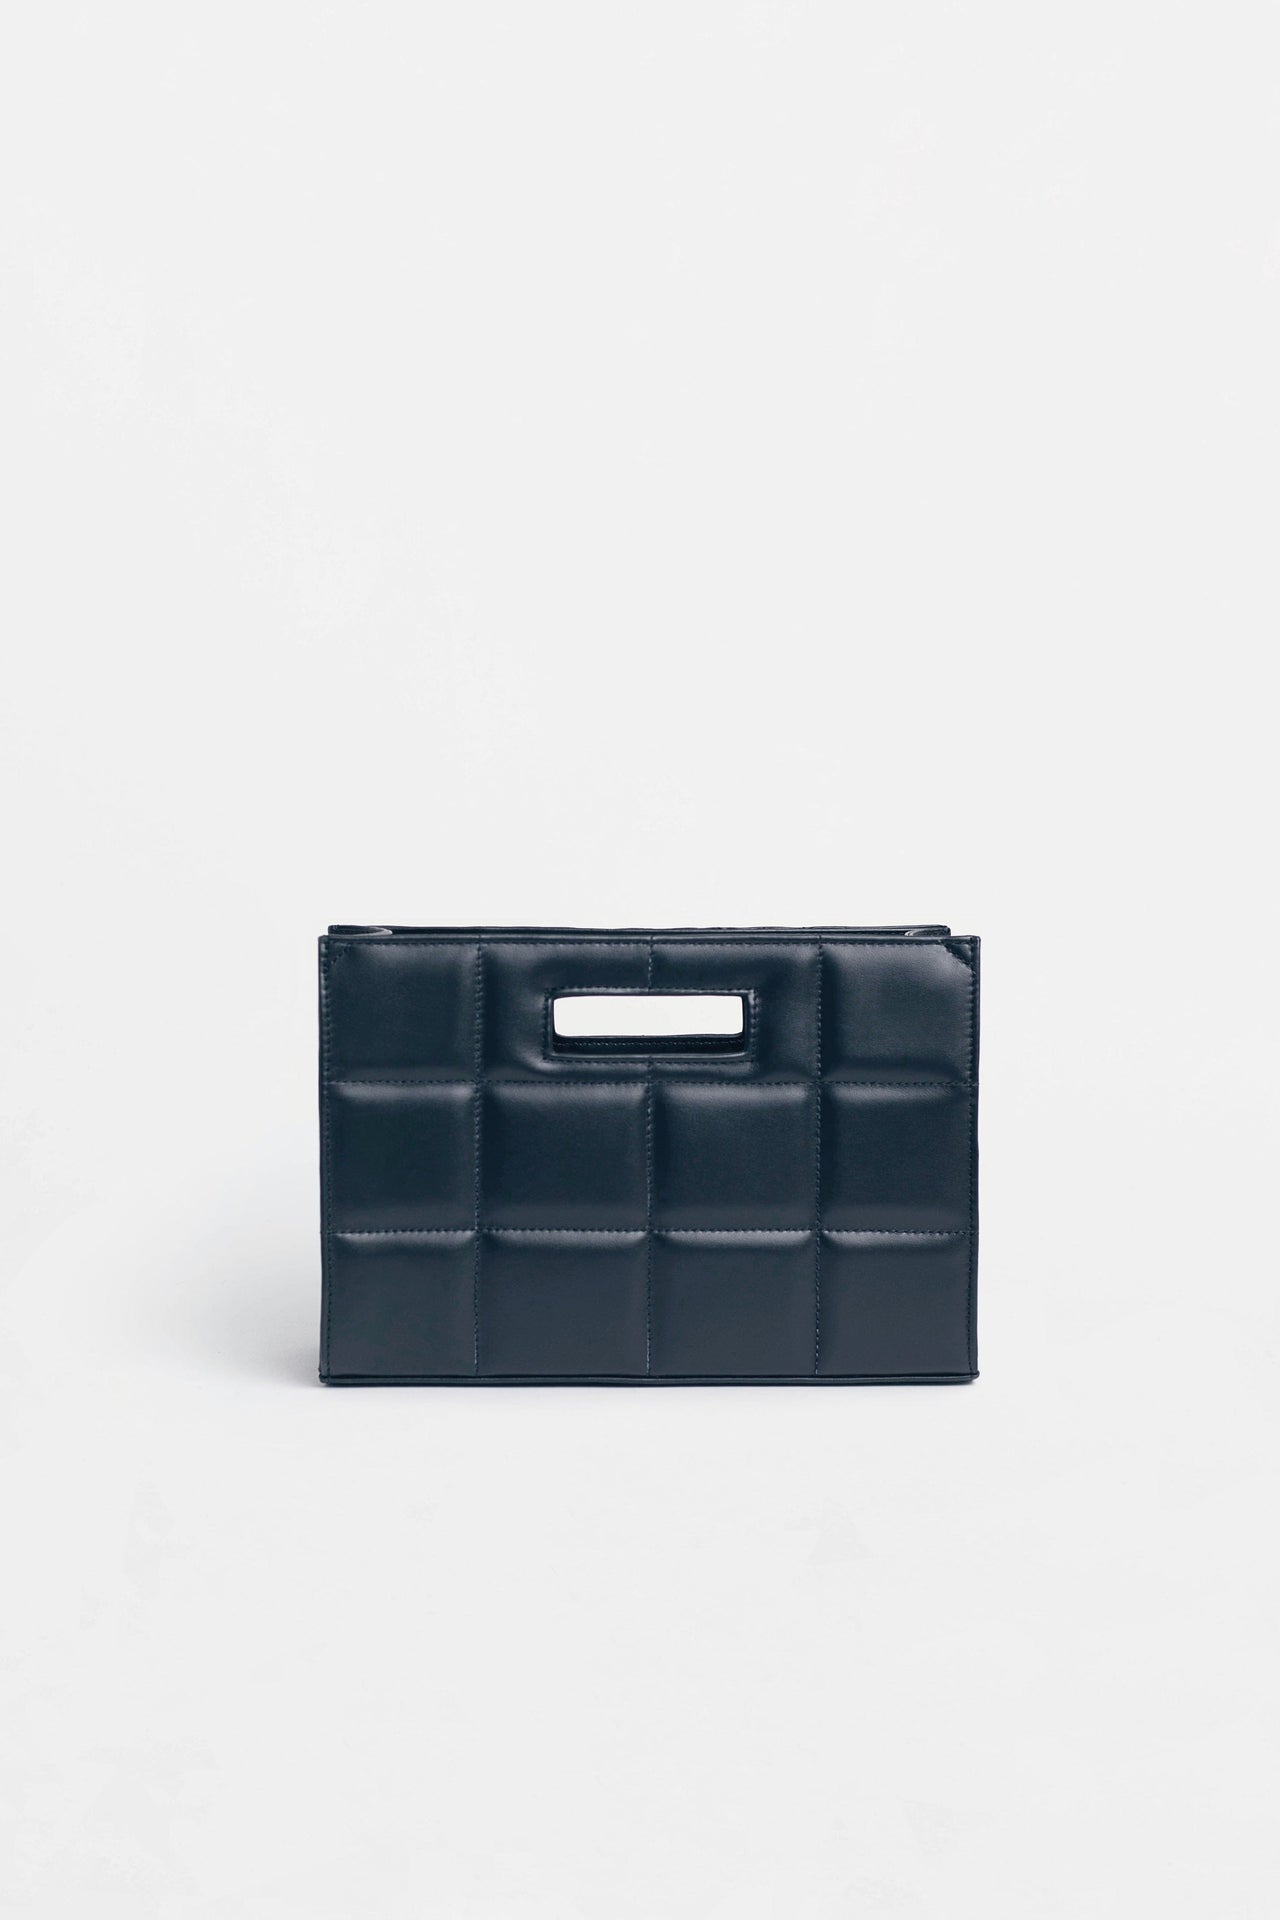 The QUILTED BAG SMALL Navy - JULIA SKERGETH